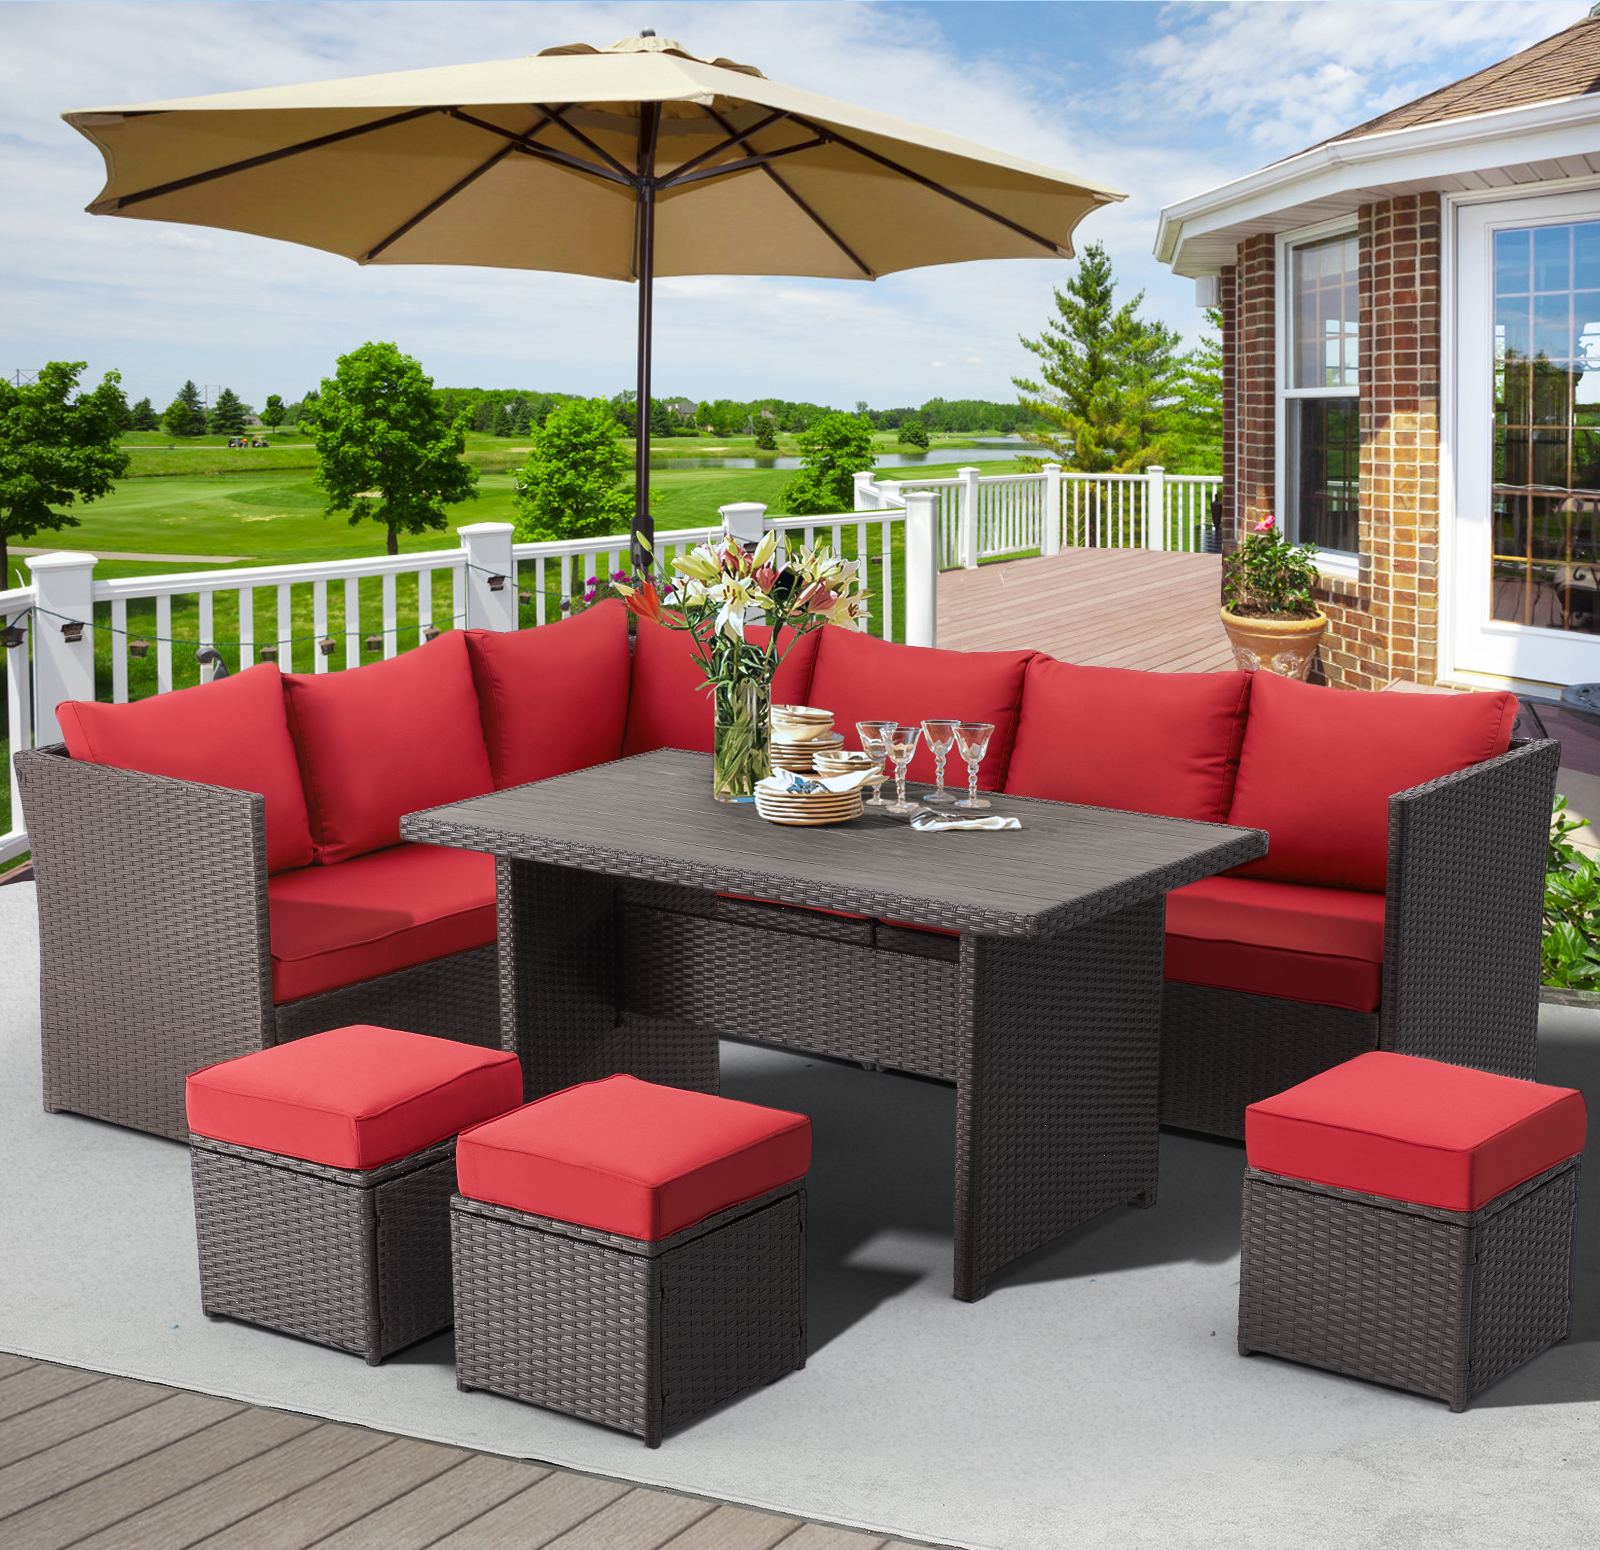 AECOJOY 7 Piece Patio Conversation Set, Outdoor Sectional Sofa Rattan Wicker Dining Furniture, Red - image 1 of 9